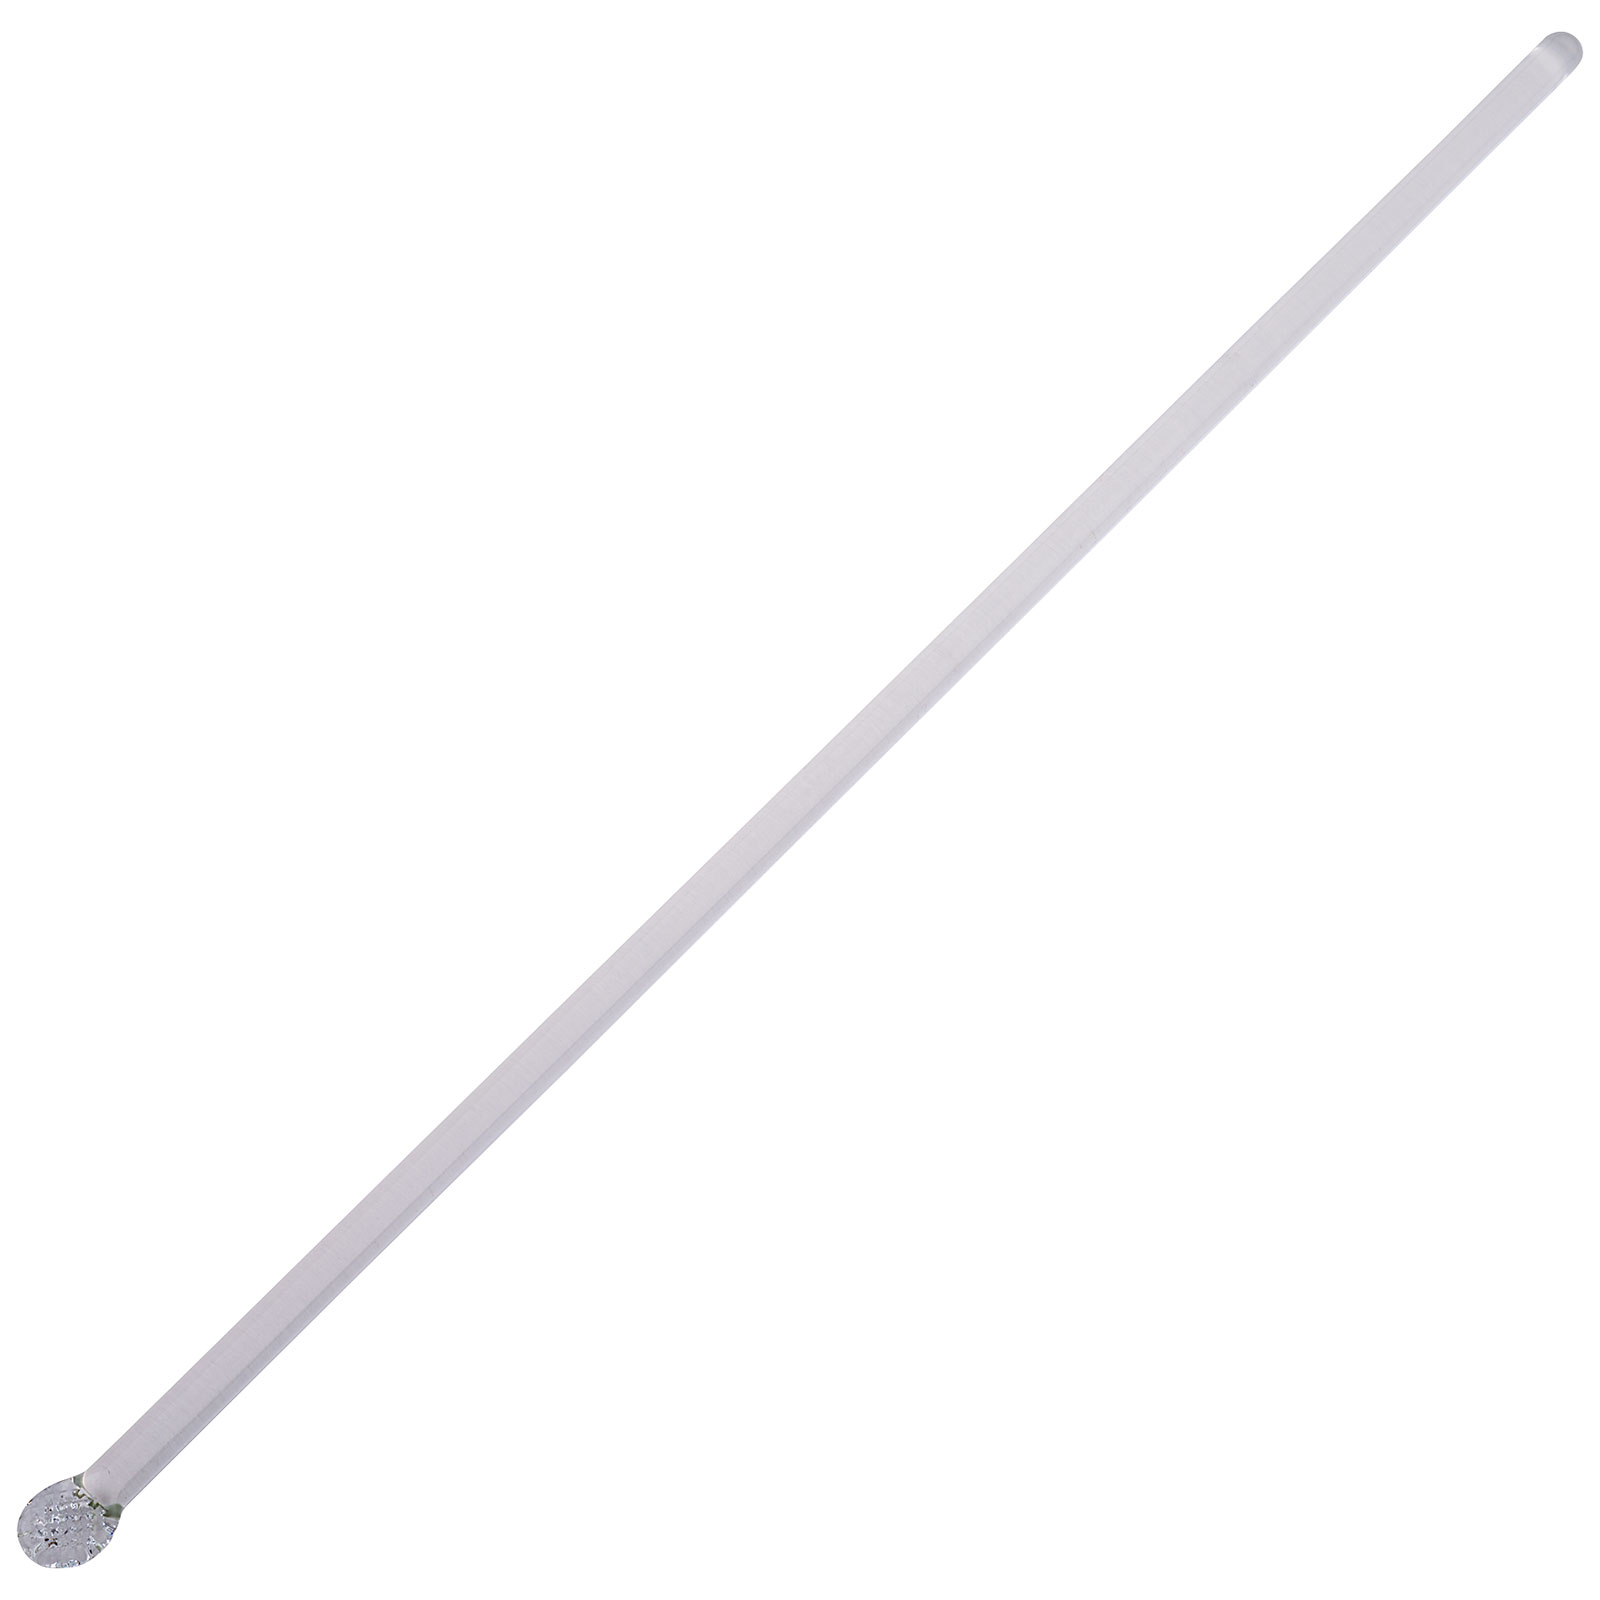 Buy Generic 30Cm Glass Stirring Rod Home Brewing Round Head Stirring Stick  Rod Multifunction Bar Tool Online at Low Prices in India - Amazon.in